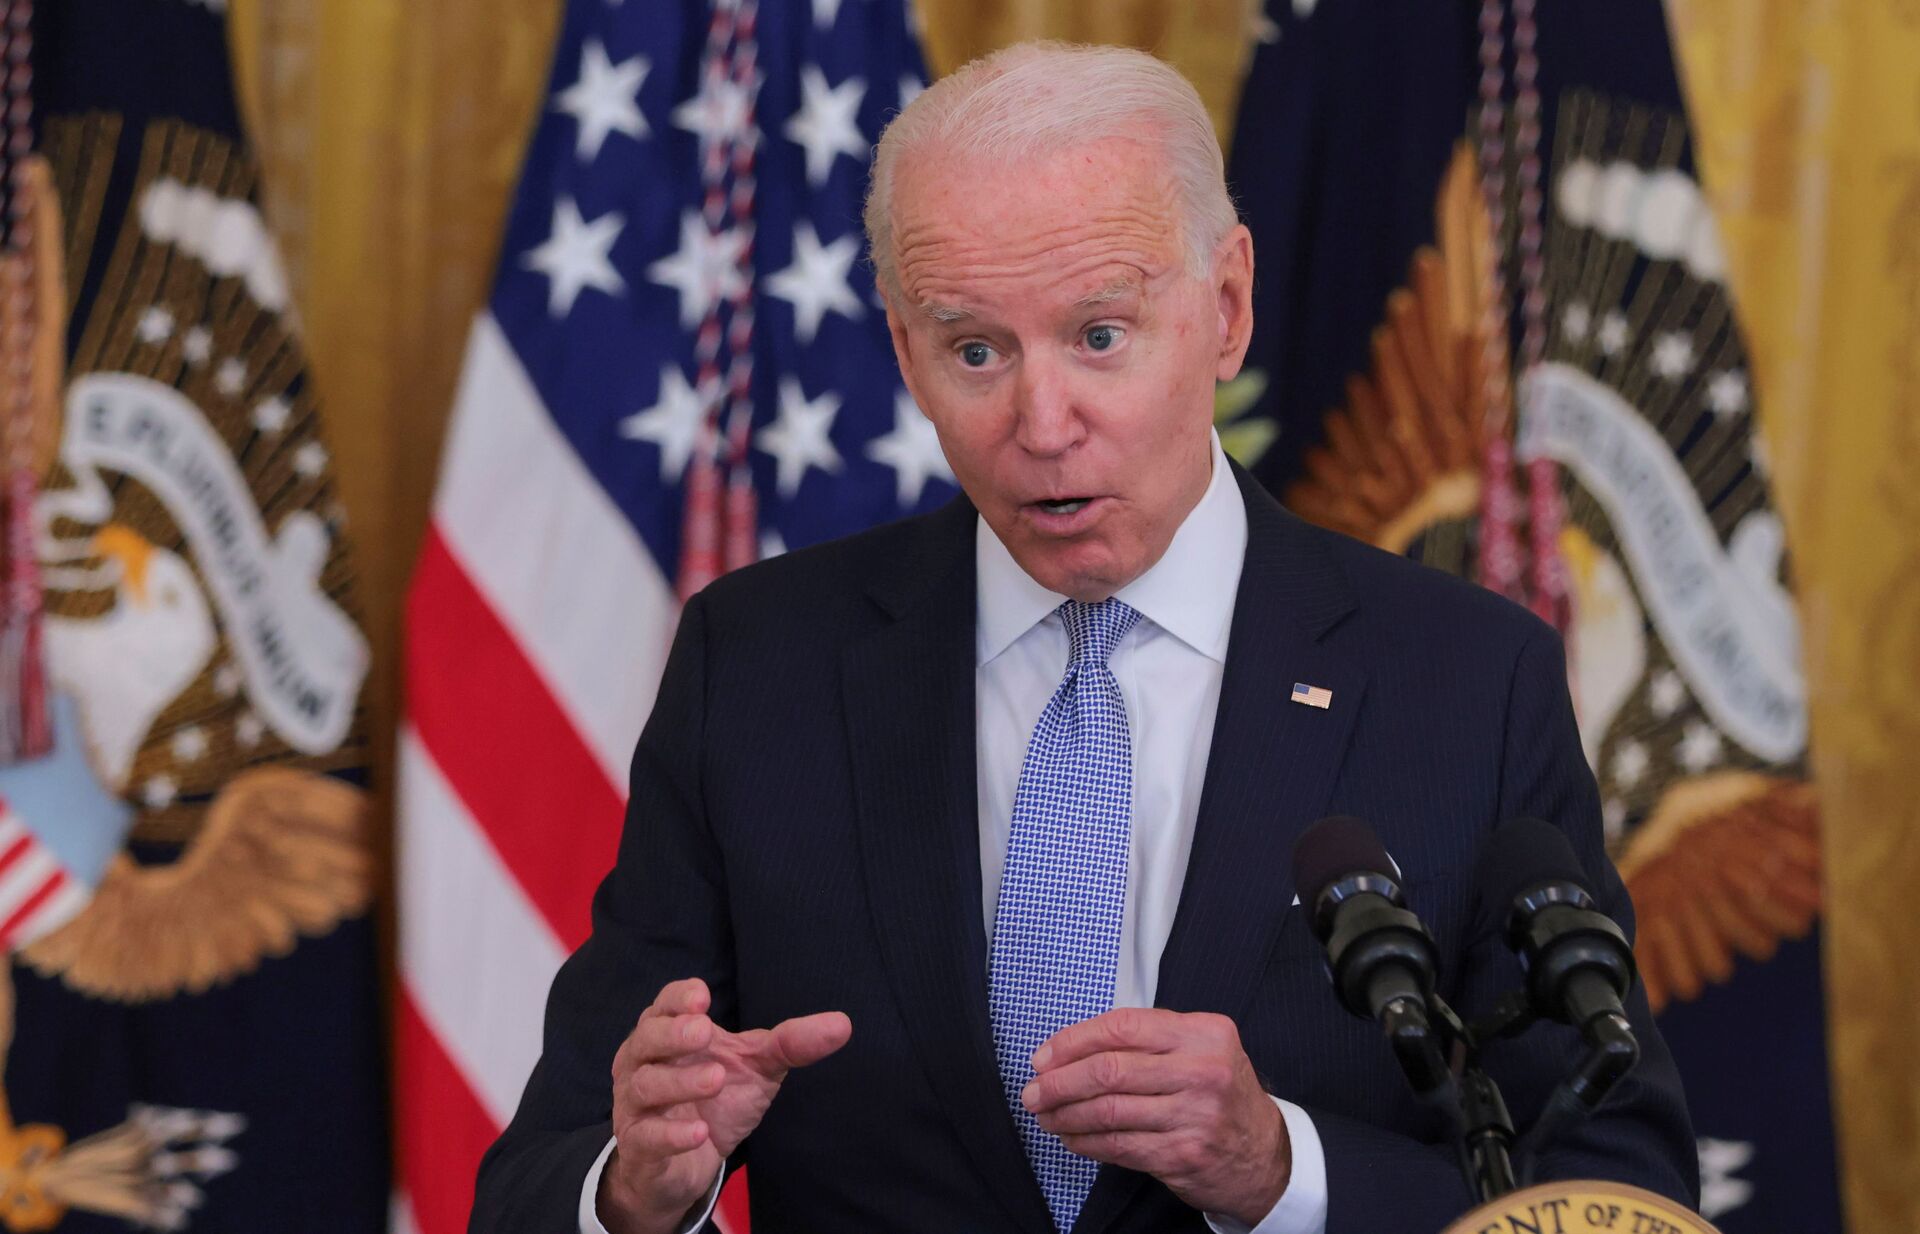 U.S. President Joe Biden answers questions about the pace of coronavirus disease (COVID-19) vaccinations during remarks at the White House in Washington - Sputnik International, 1920, 07.09.2021